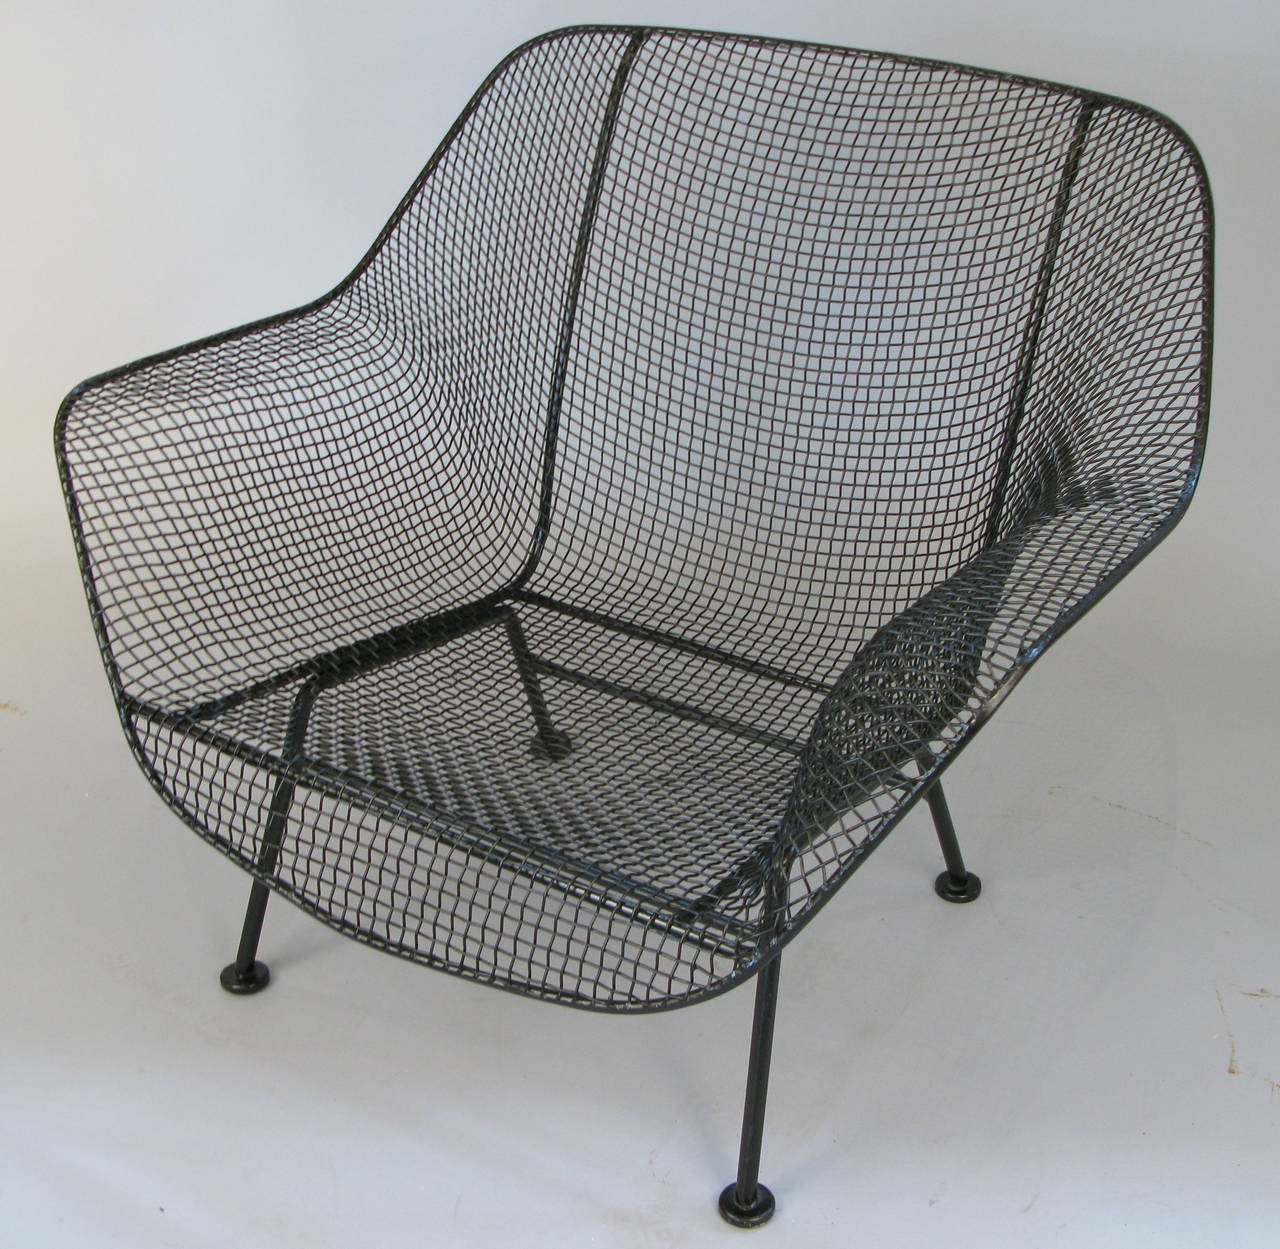 A matched three-piece set of vintage 1950s 'Sculptura' garden lounge chairs and a settee designed by Russell Woodard with wrought iron frames and sculpted woven steel mesh. All three pieces just refinished in satin black, or can be finished in a